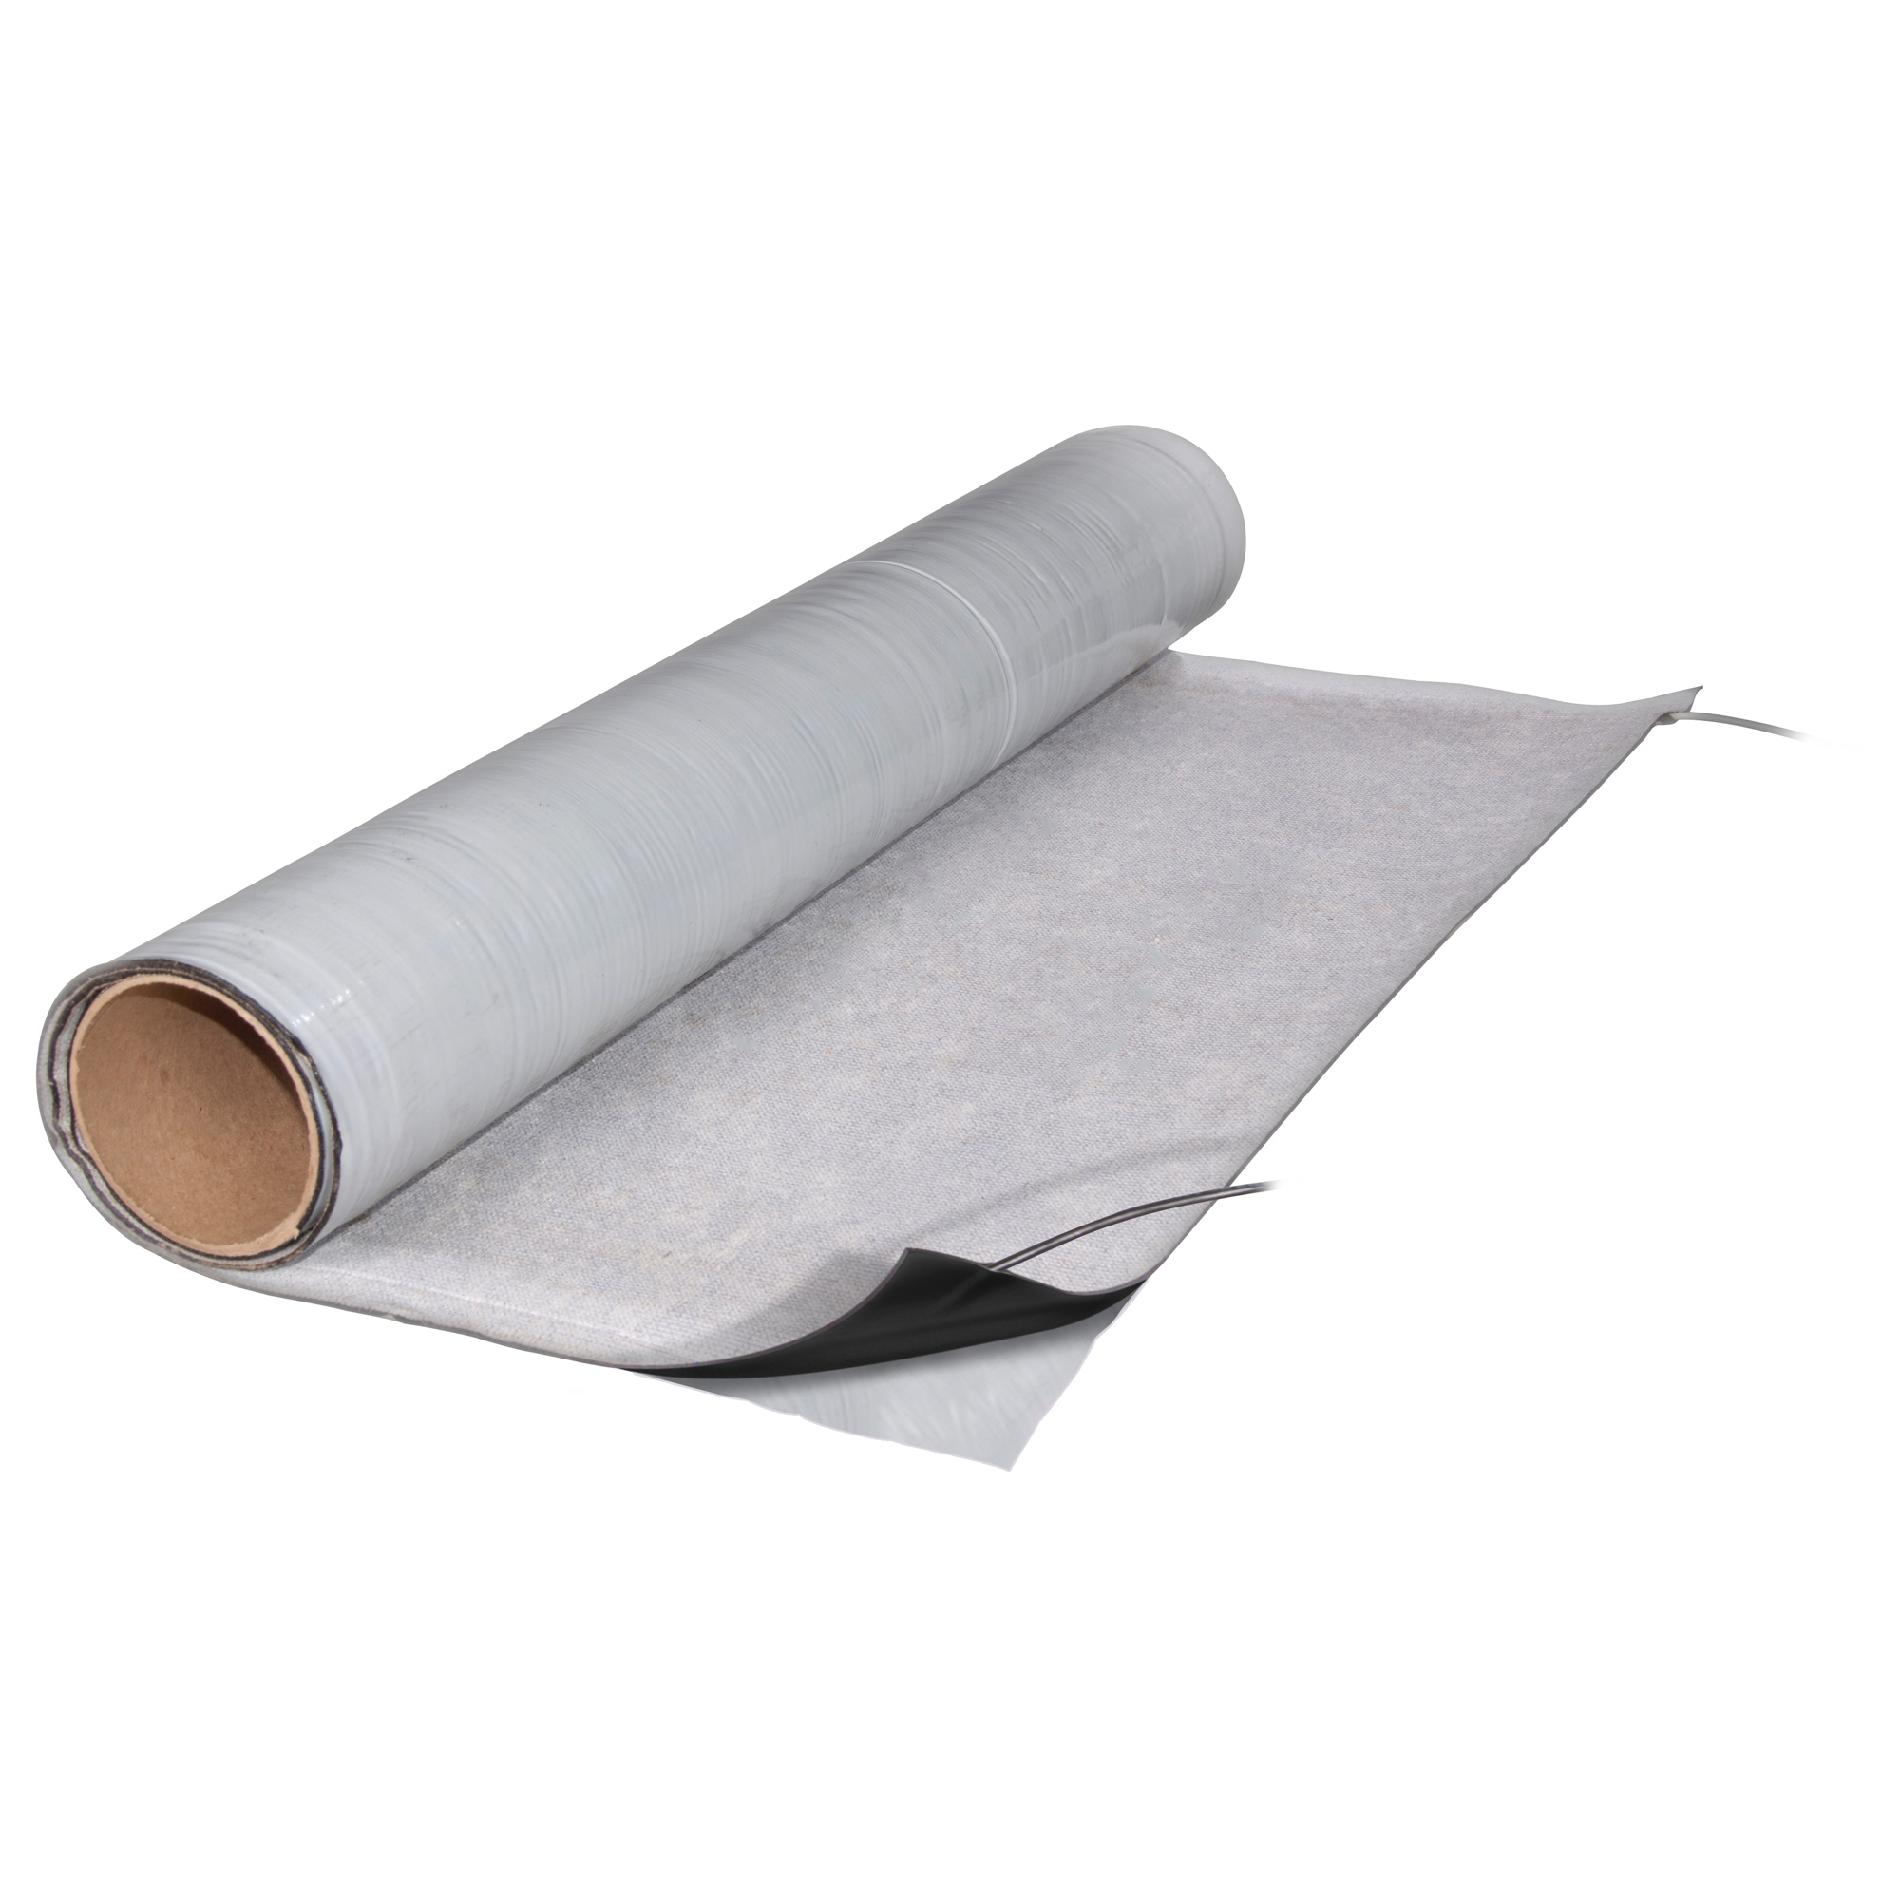 2 ft. x 9 ft. Under Tile Heat Mat for Underfloor Radiant Heat/Anti-fracture Protection System